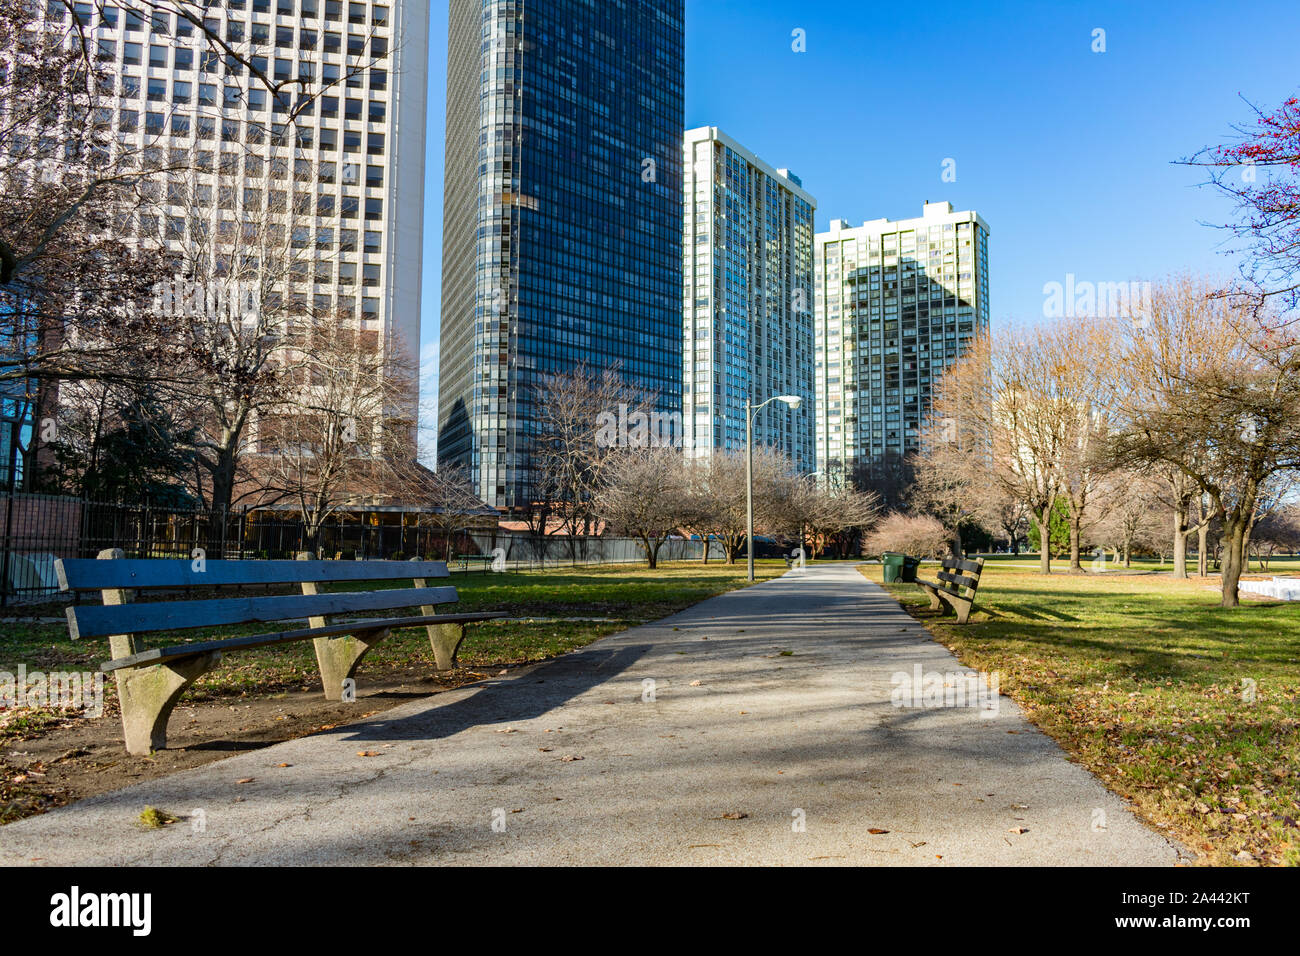 Bench Lined Path in Edgewater Chicago with Residential Buildings Stock Photo